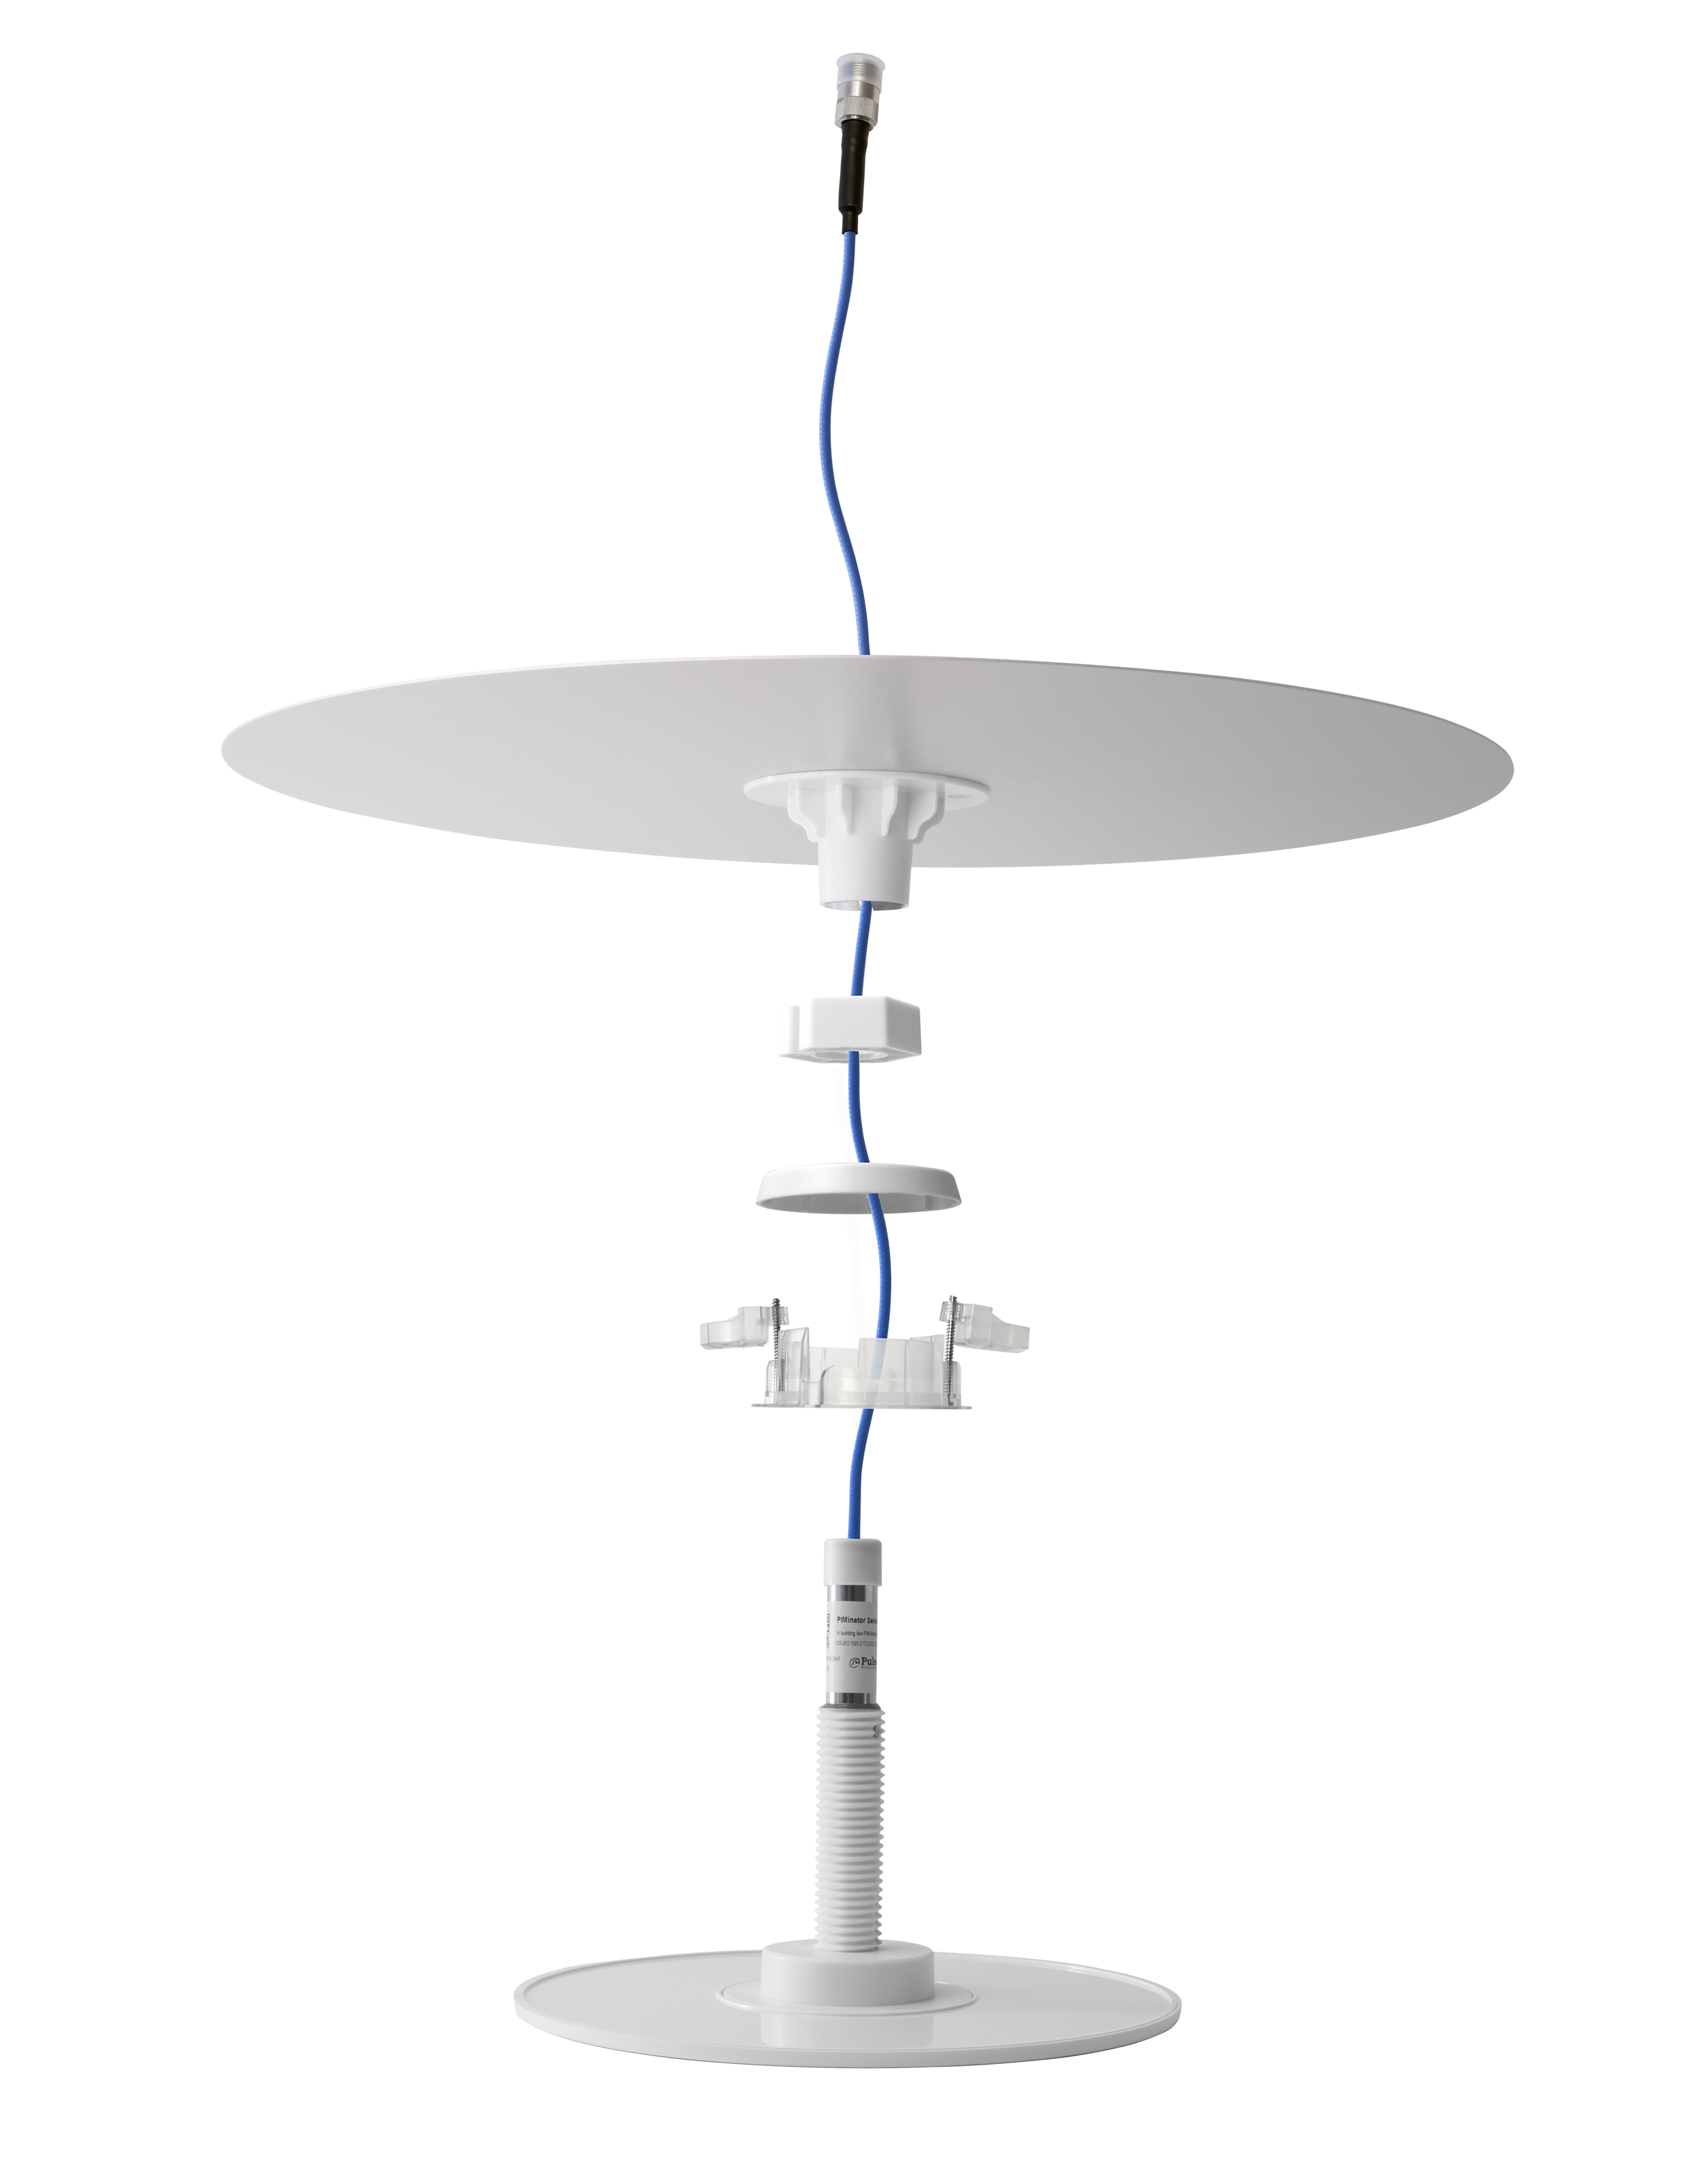 4g-low-profile-dome-antenna-314406